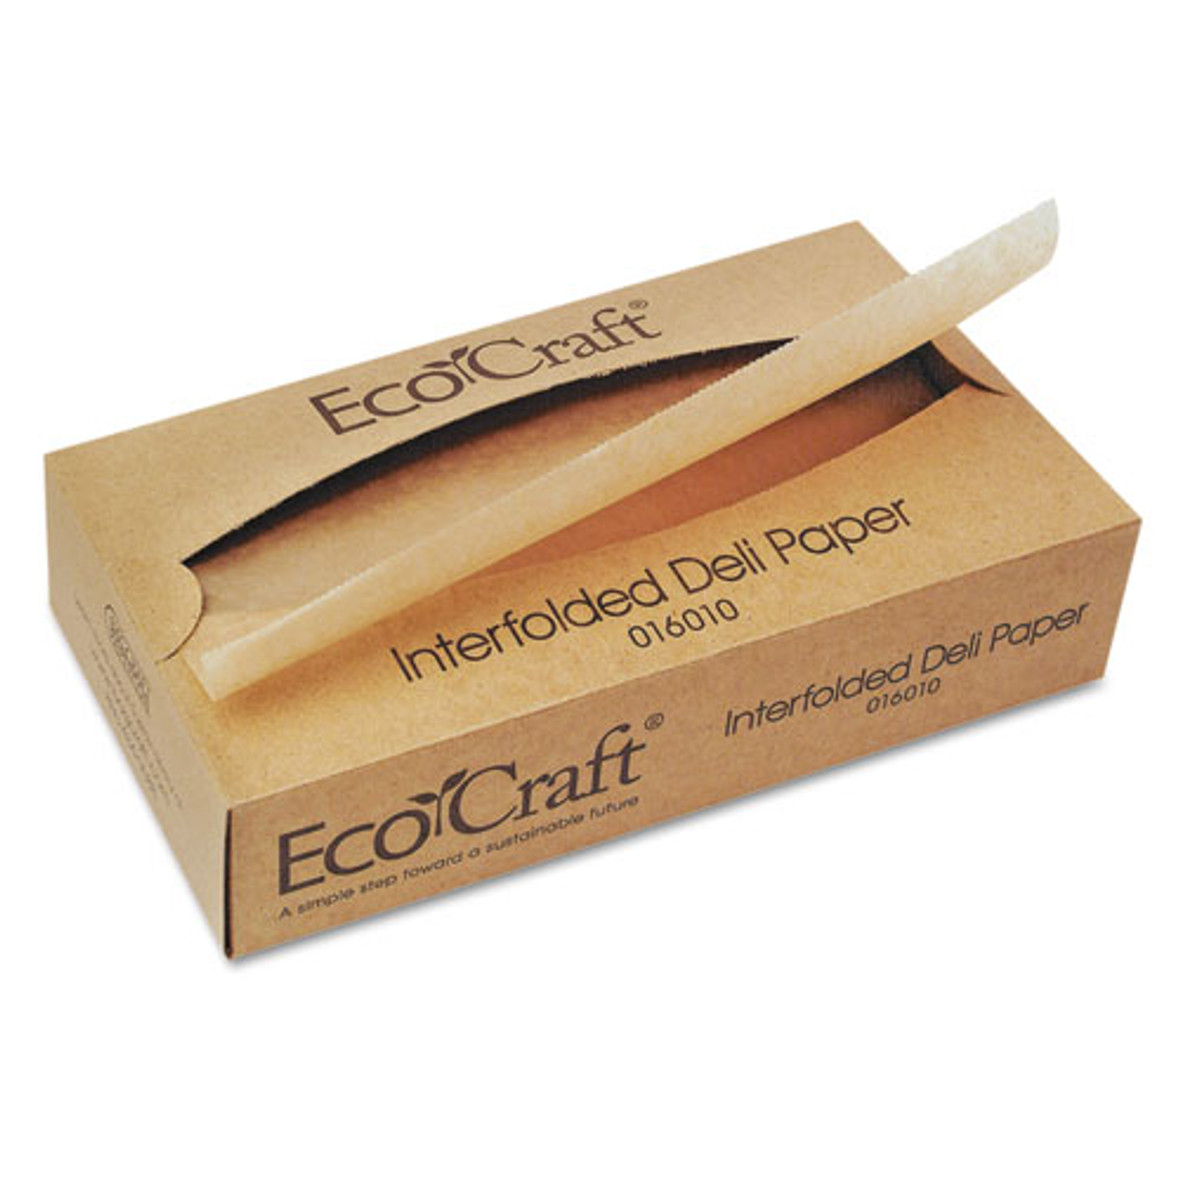 EcoCraft Ecocraft Interfolded Soy Wax Deli Sheets, 10 x 10.75, 500/Box, 12 Boxes/Carton